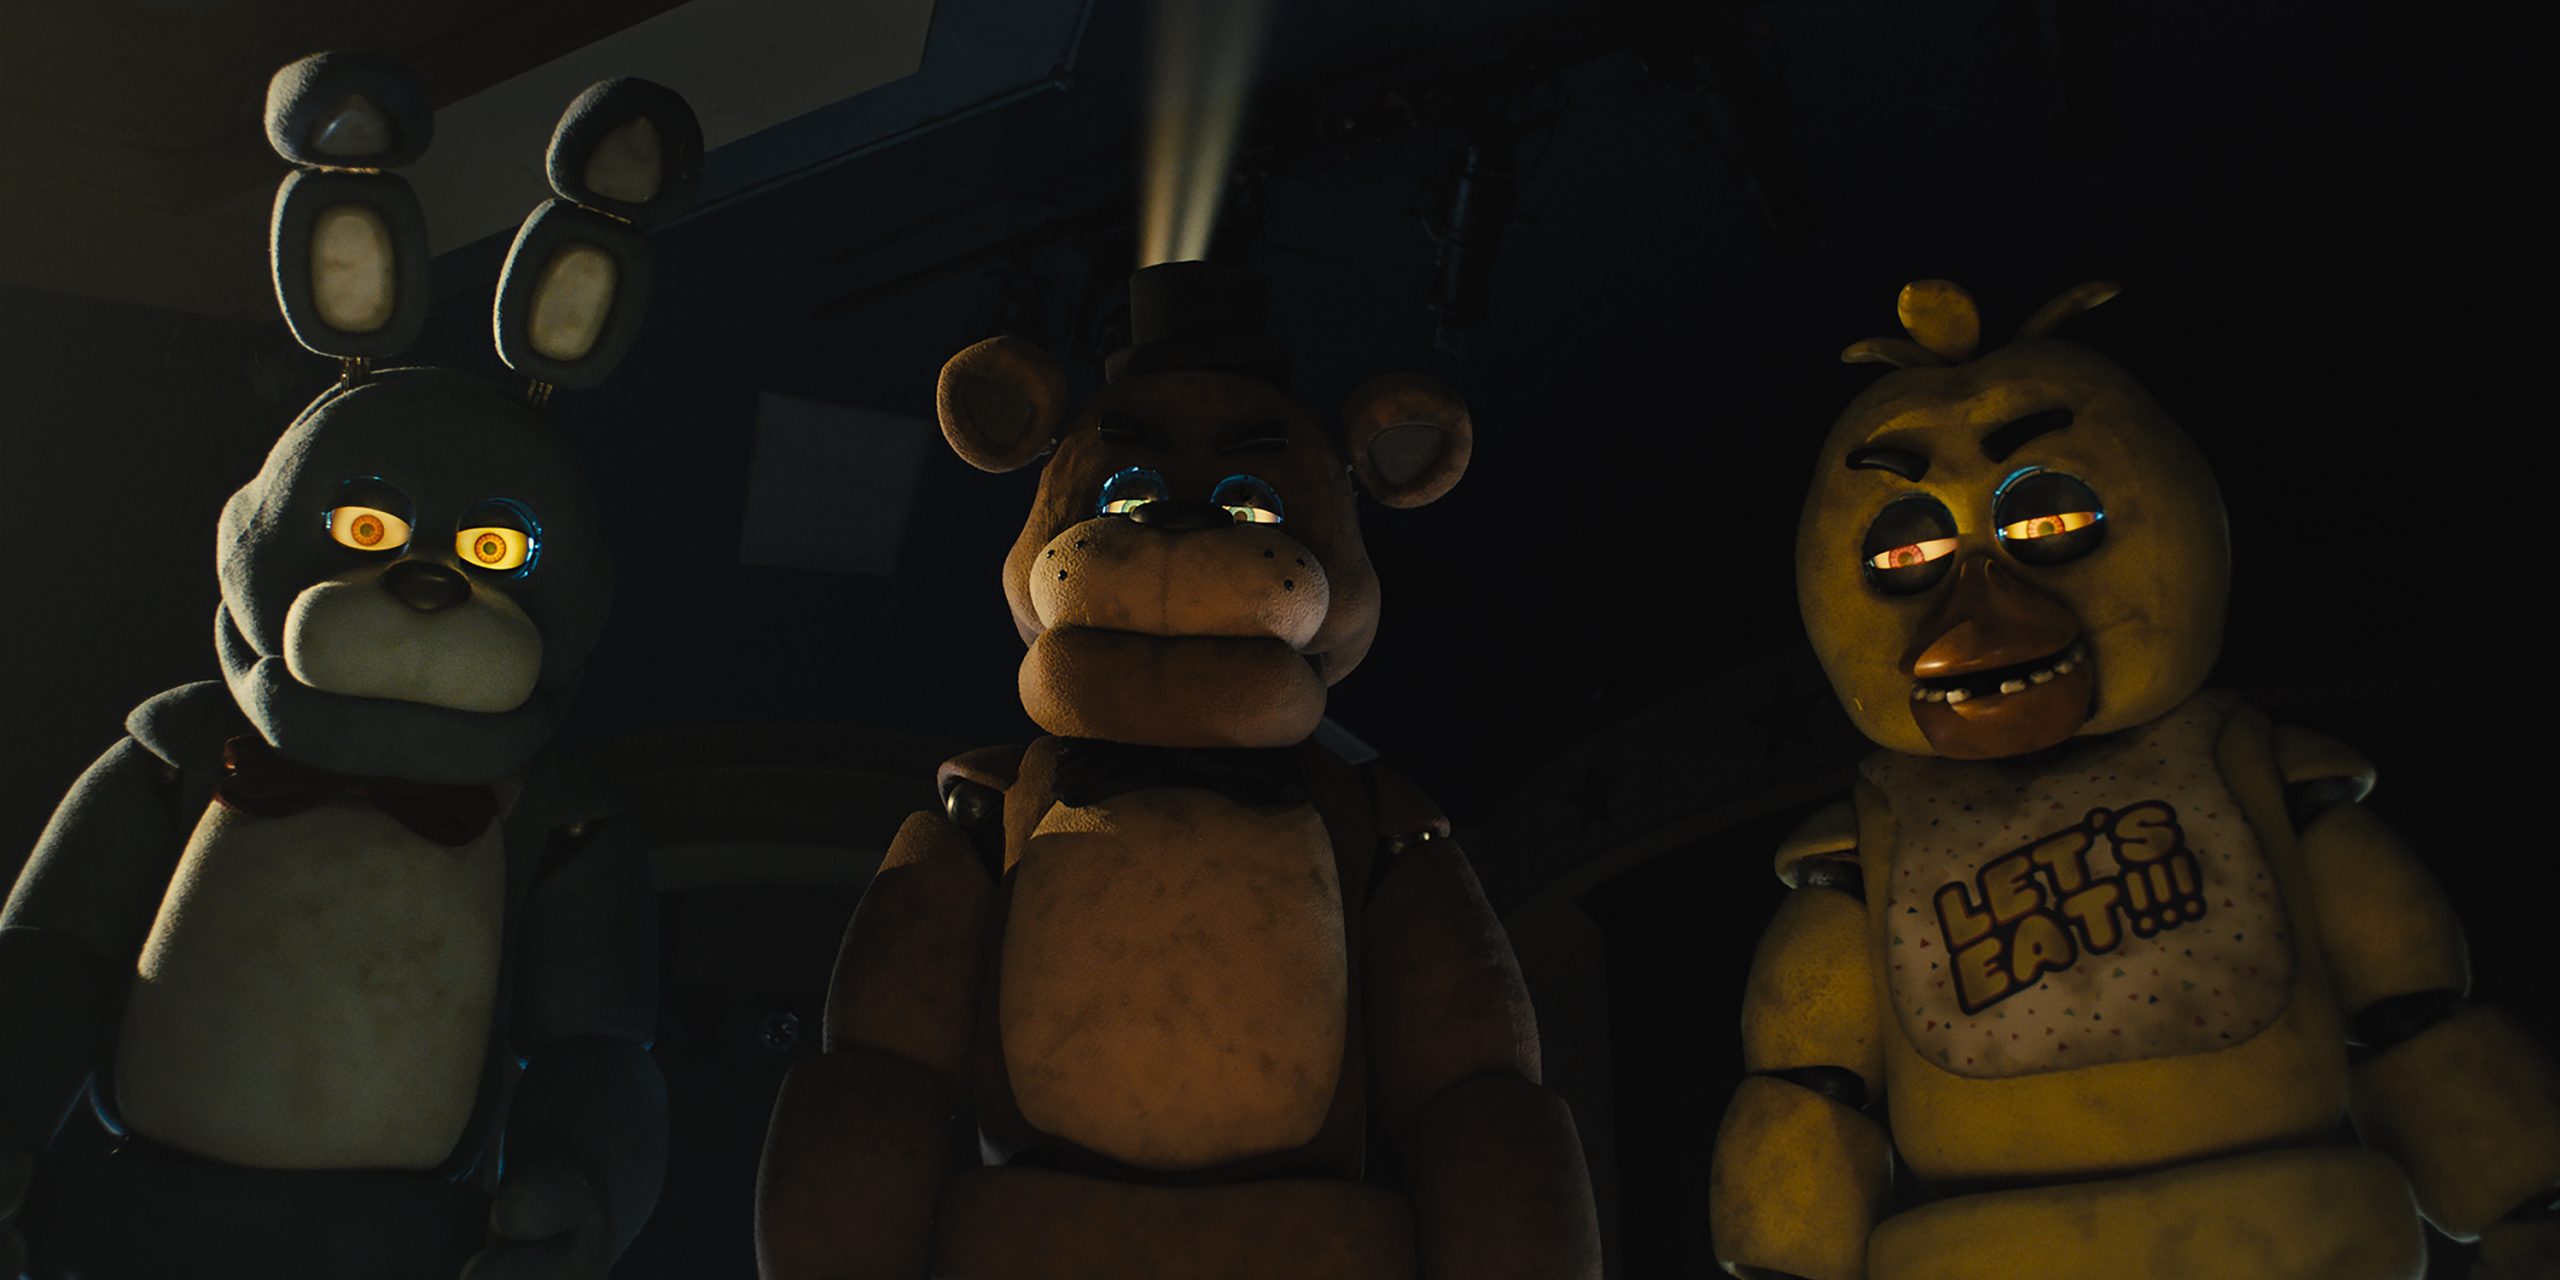 FNAF Movie Reviews: Critics Share Mixed First Reactions